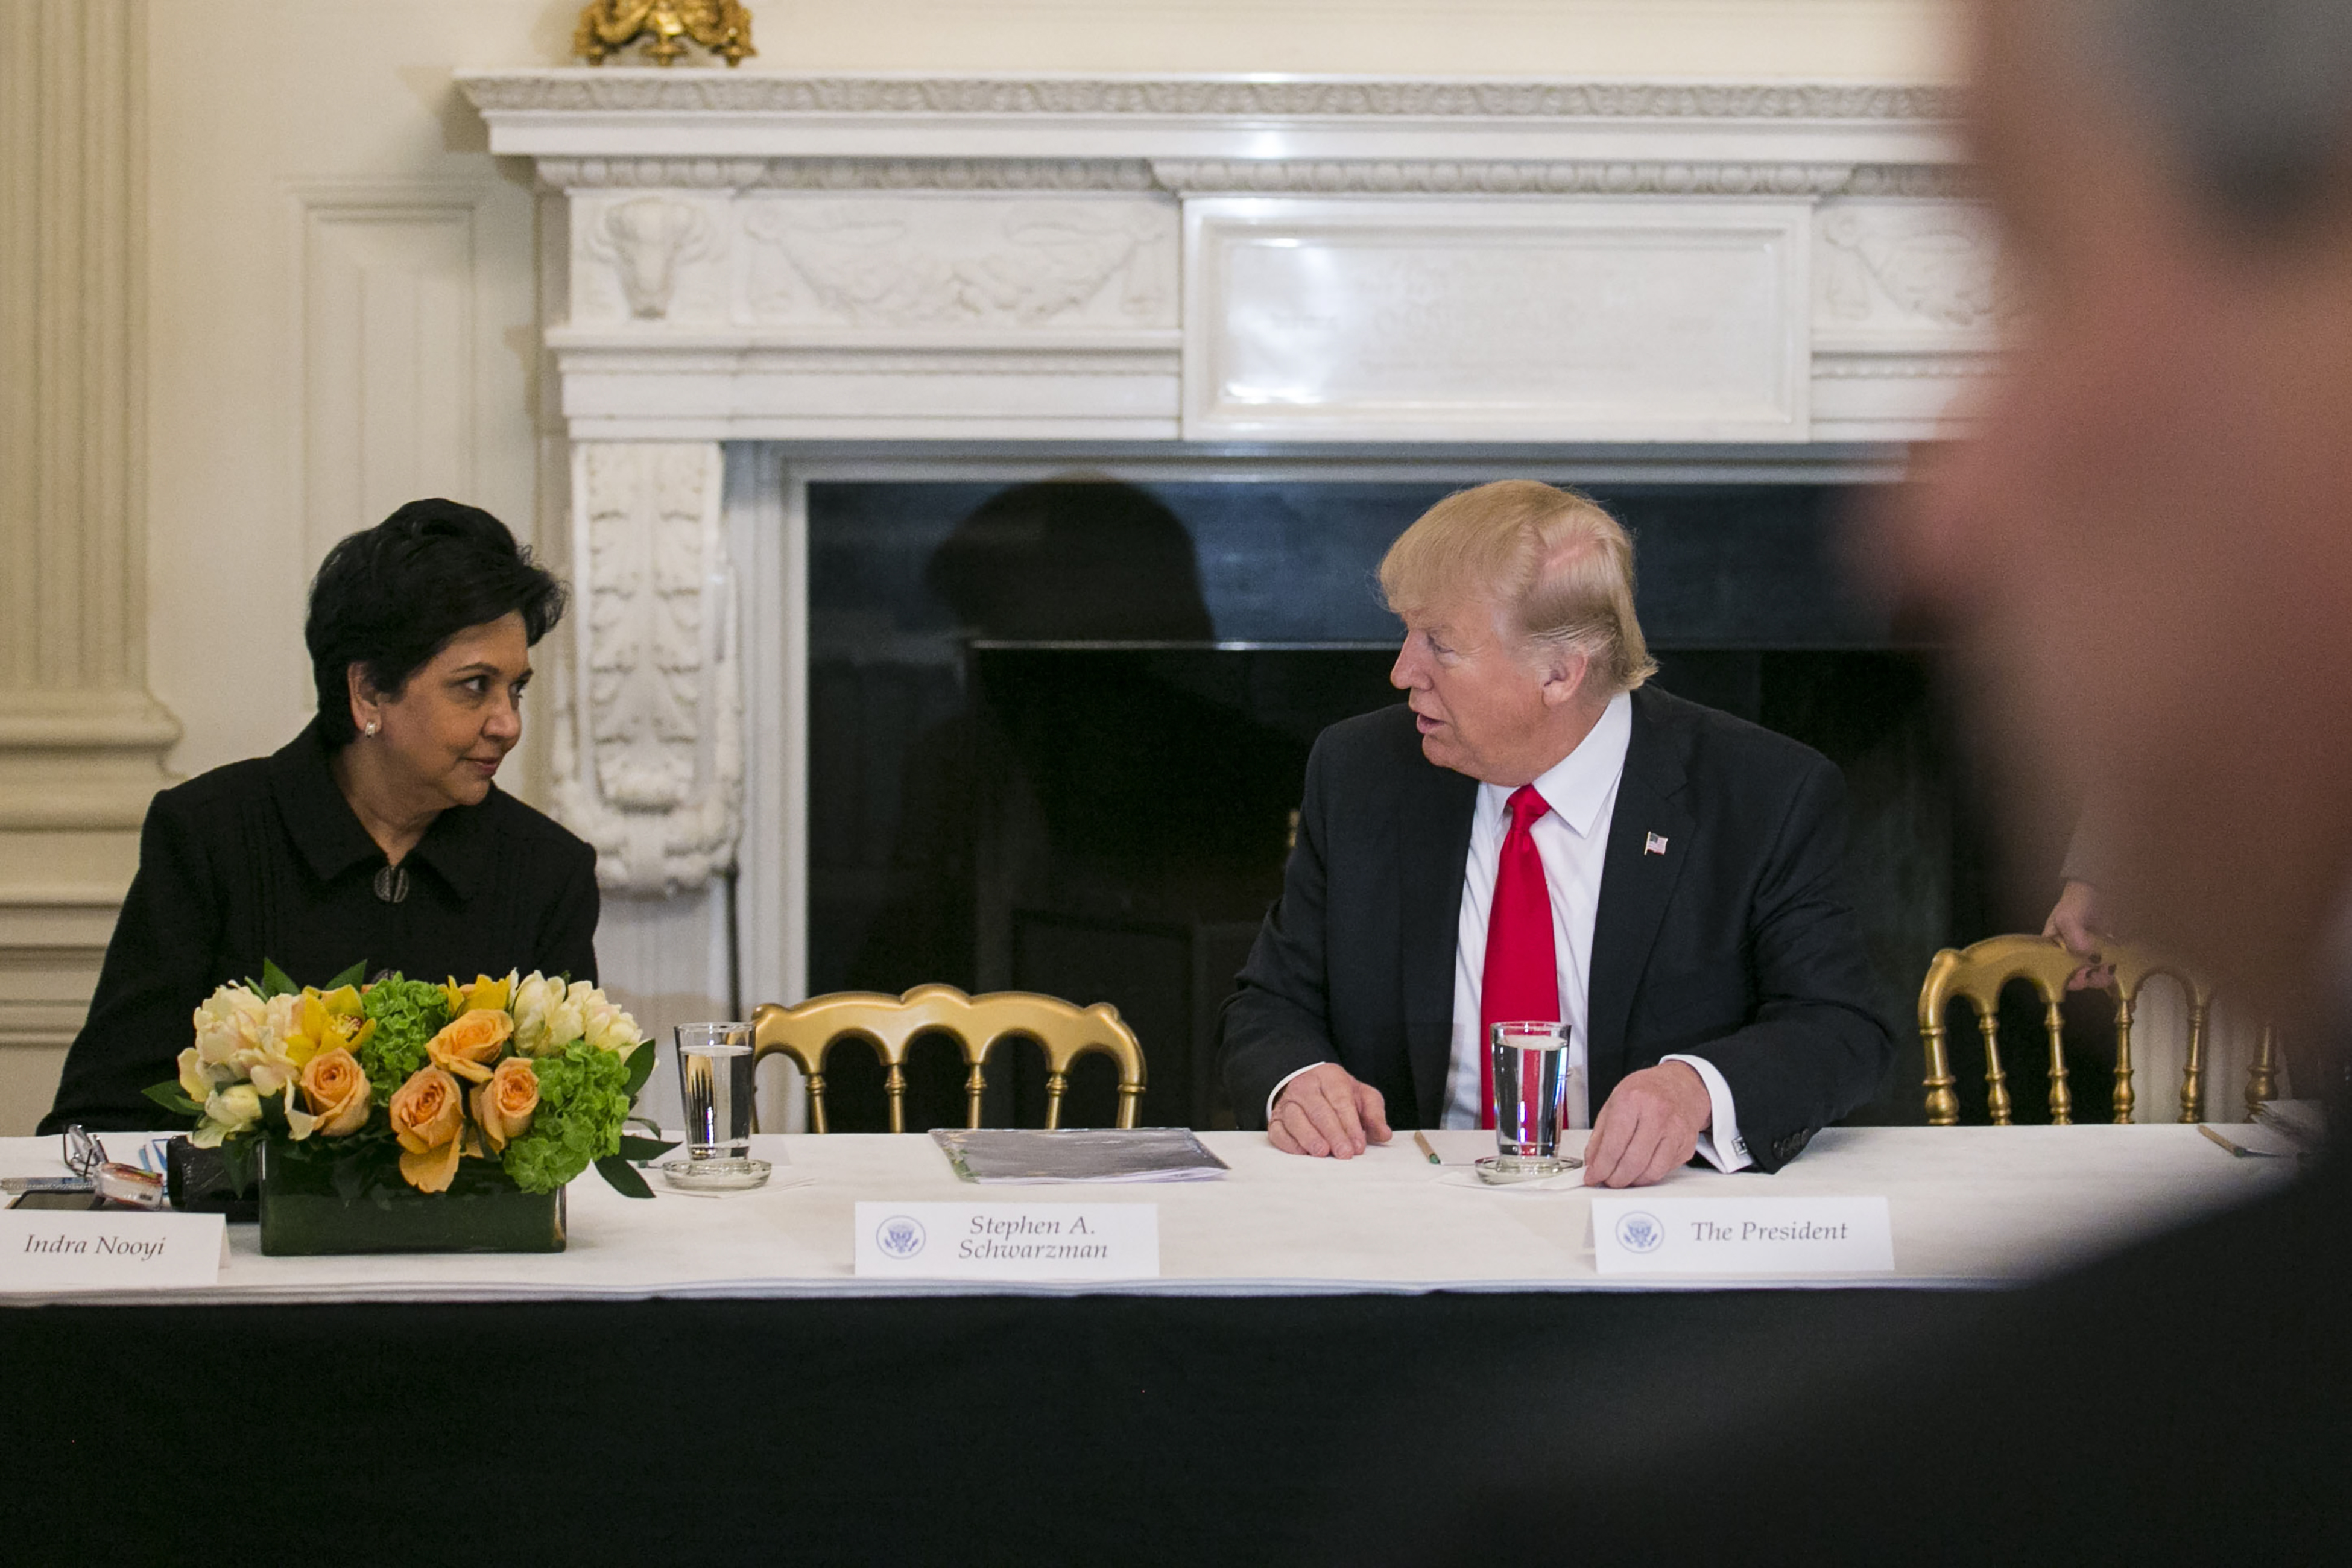 A file photo shows Indra Nooyi speaking to Donald Trump at the White House.